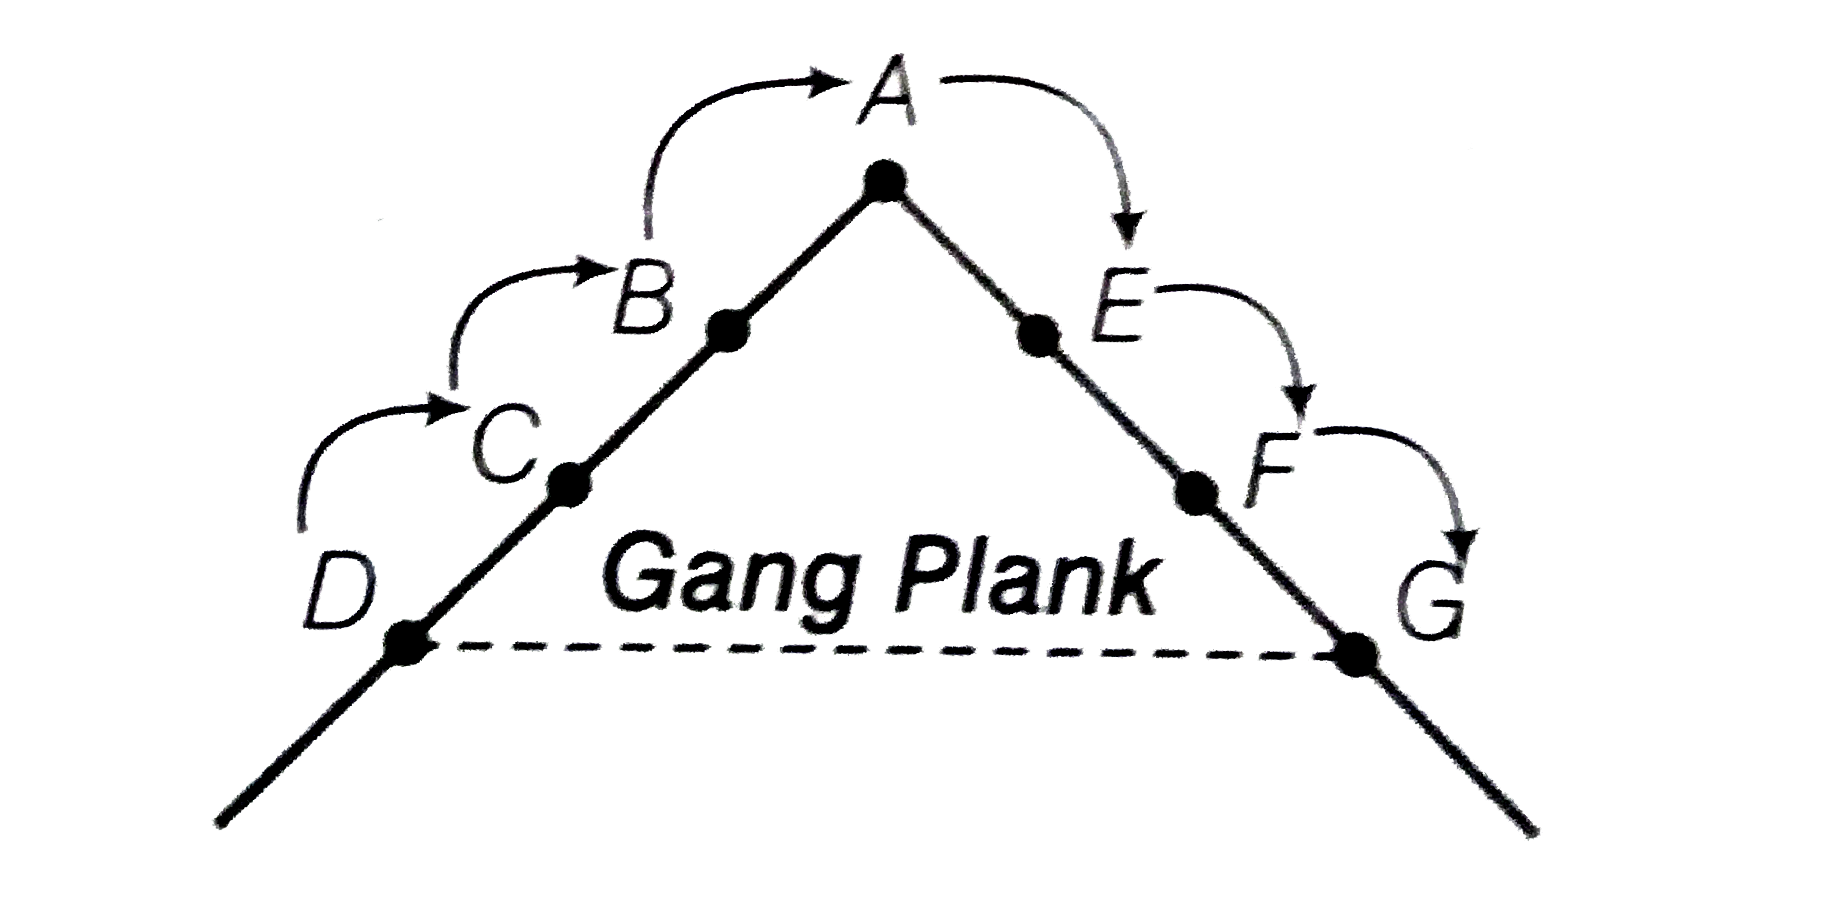 Explain the principle of 'Scalar Chain' and gang plank.